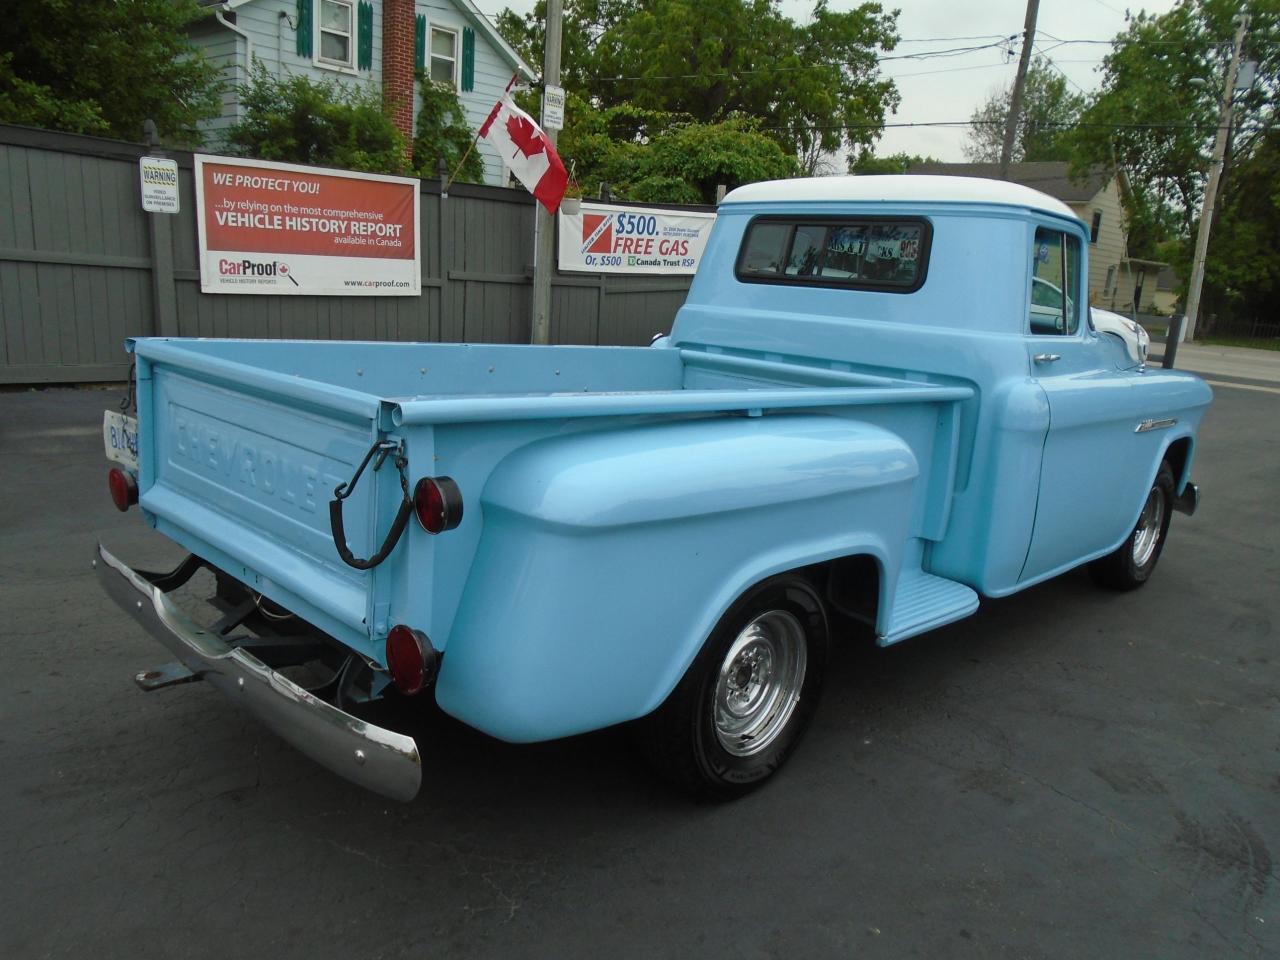 1955 Chevrolet Pickup (Other) 3200 Series Half-Ton Step-Side Long-Box - Photo #8